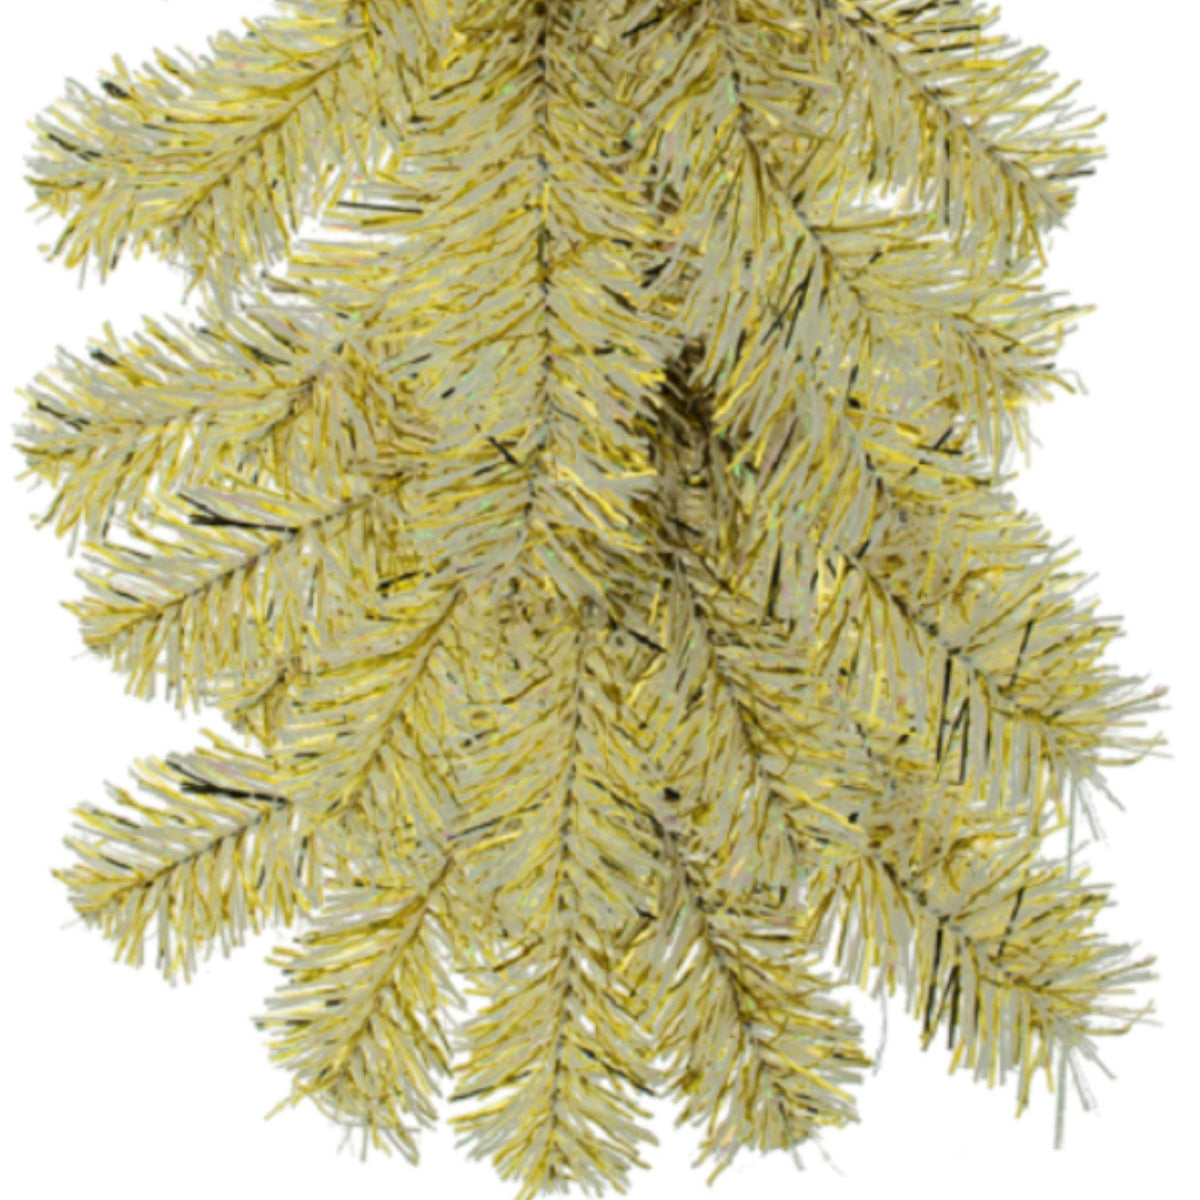 Shop for Lee Display's brand new 6FT Shiny Gold and Metallic Silver Tinsel Brush Garlands on sale at leedisplay.com.  End